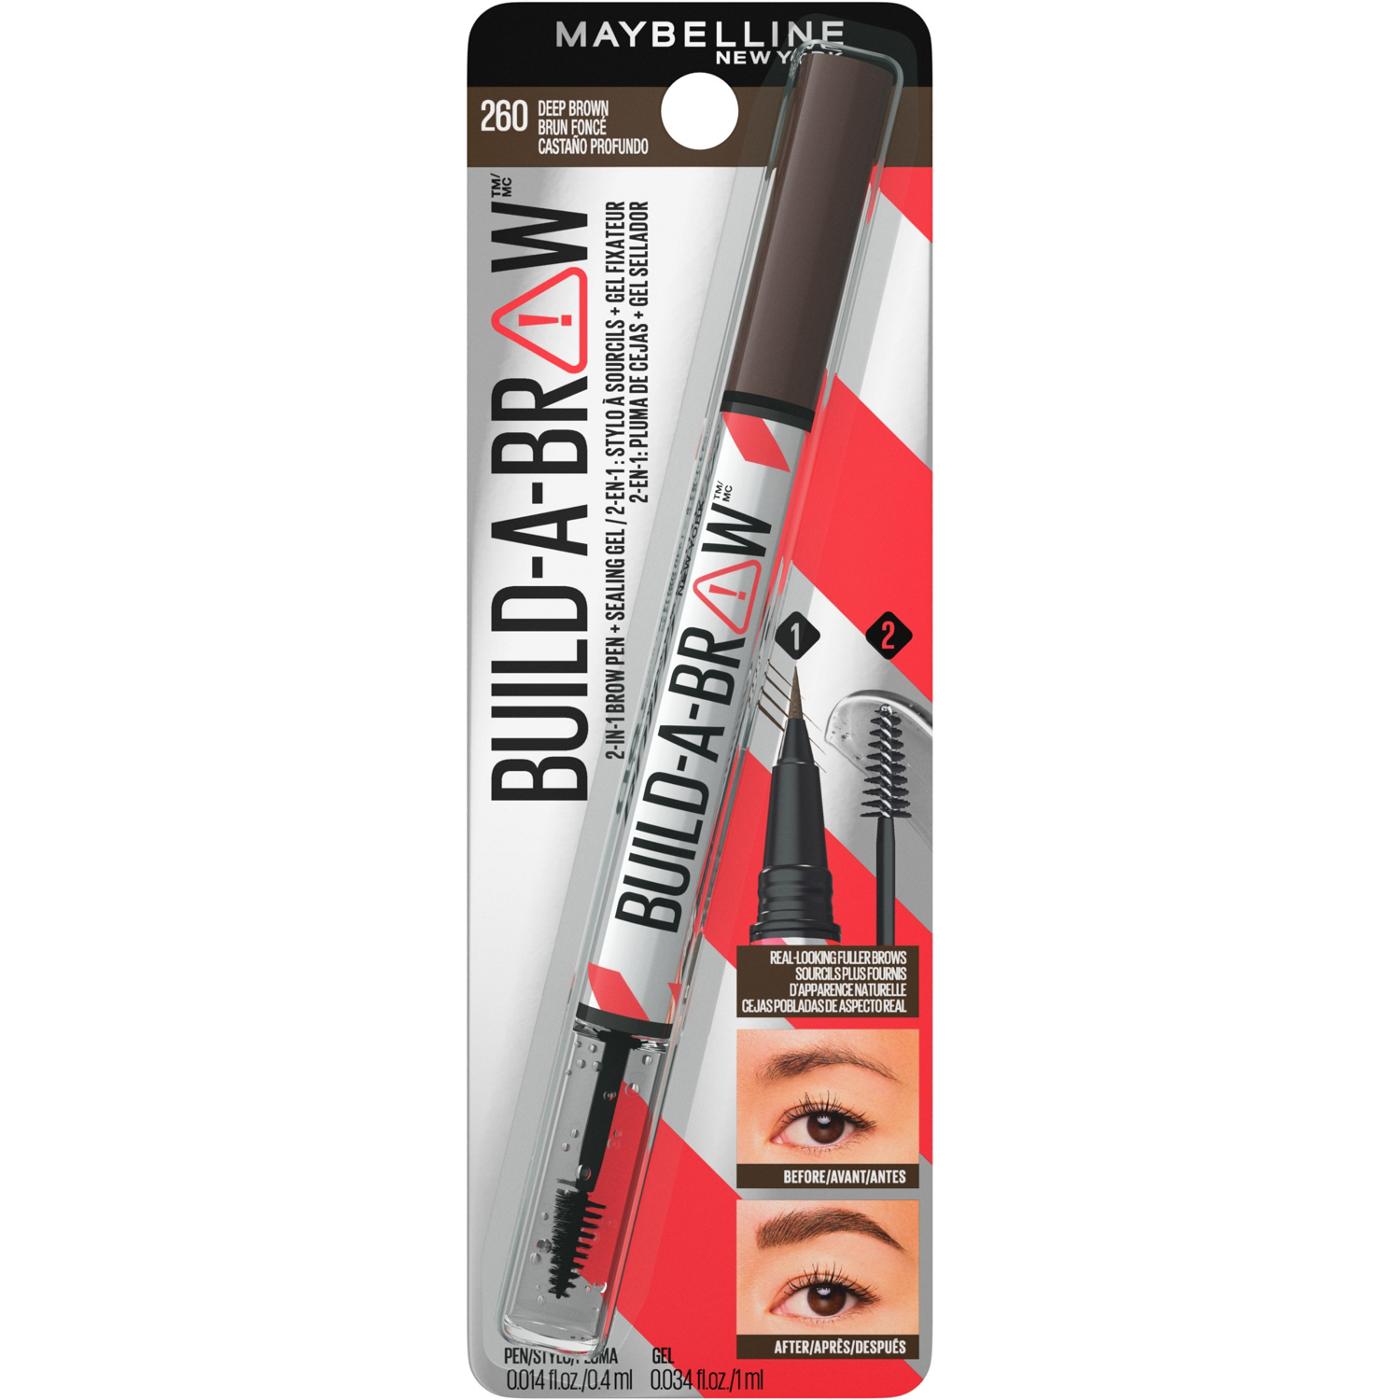 Maybelline Build A Brow 2 In 1 Brow Pen - Deep Brown; image 11 of 17